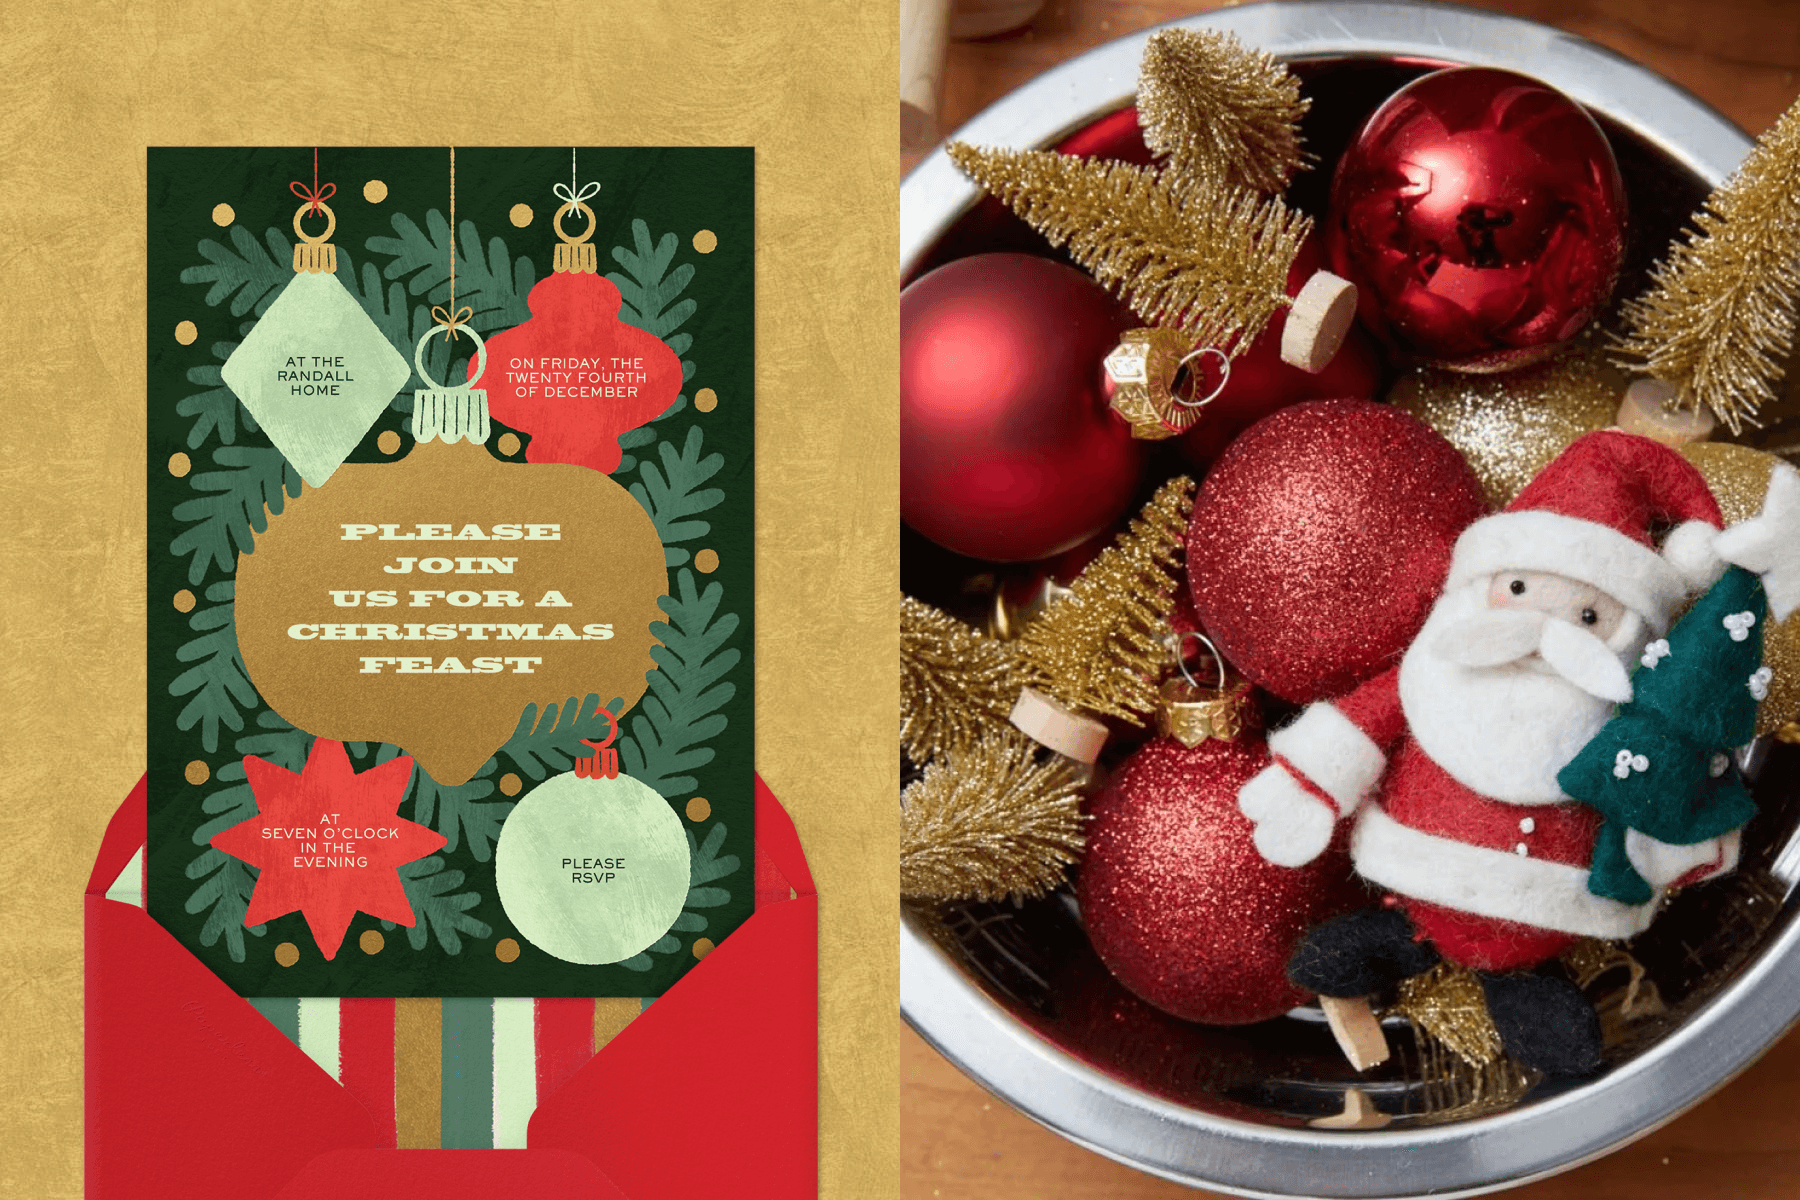 An invitation with simple retro Christmas tree ornaments in gold, silver, and red; a bowl of red ball and gold tree ornaments with a felted Santa-shaped ornament.